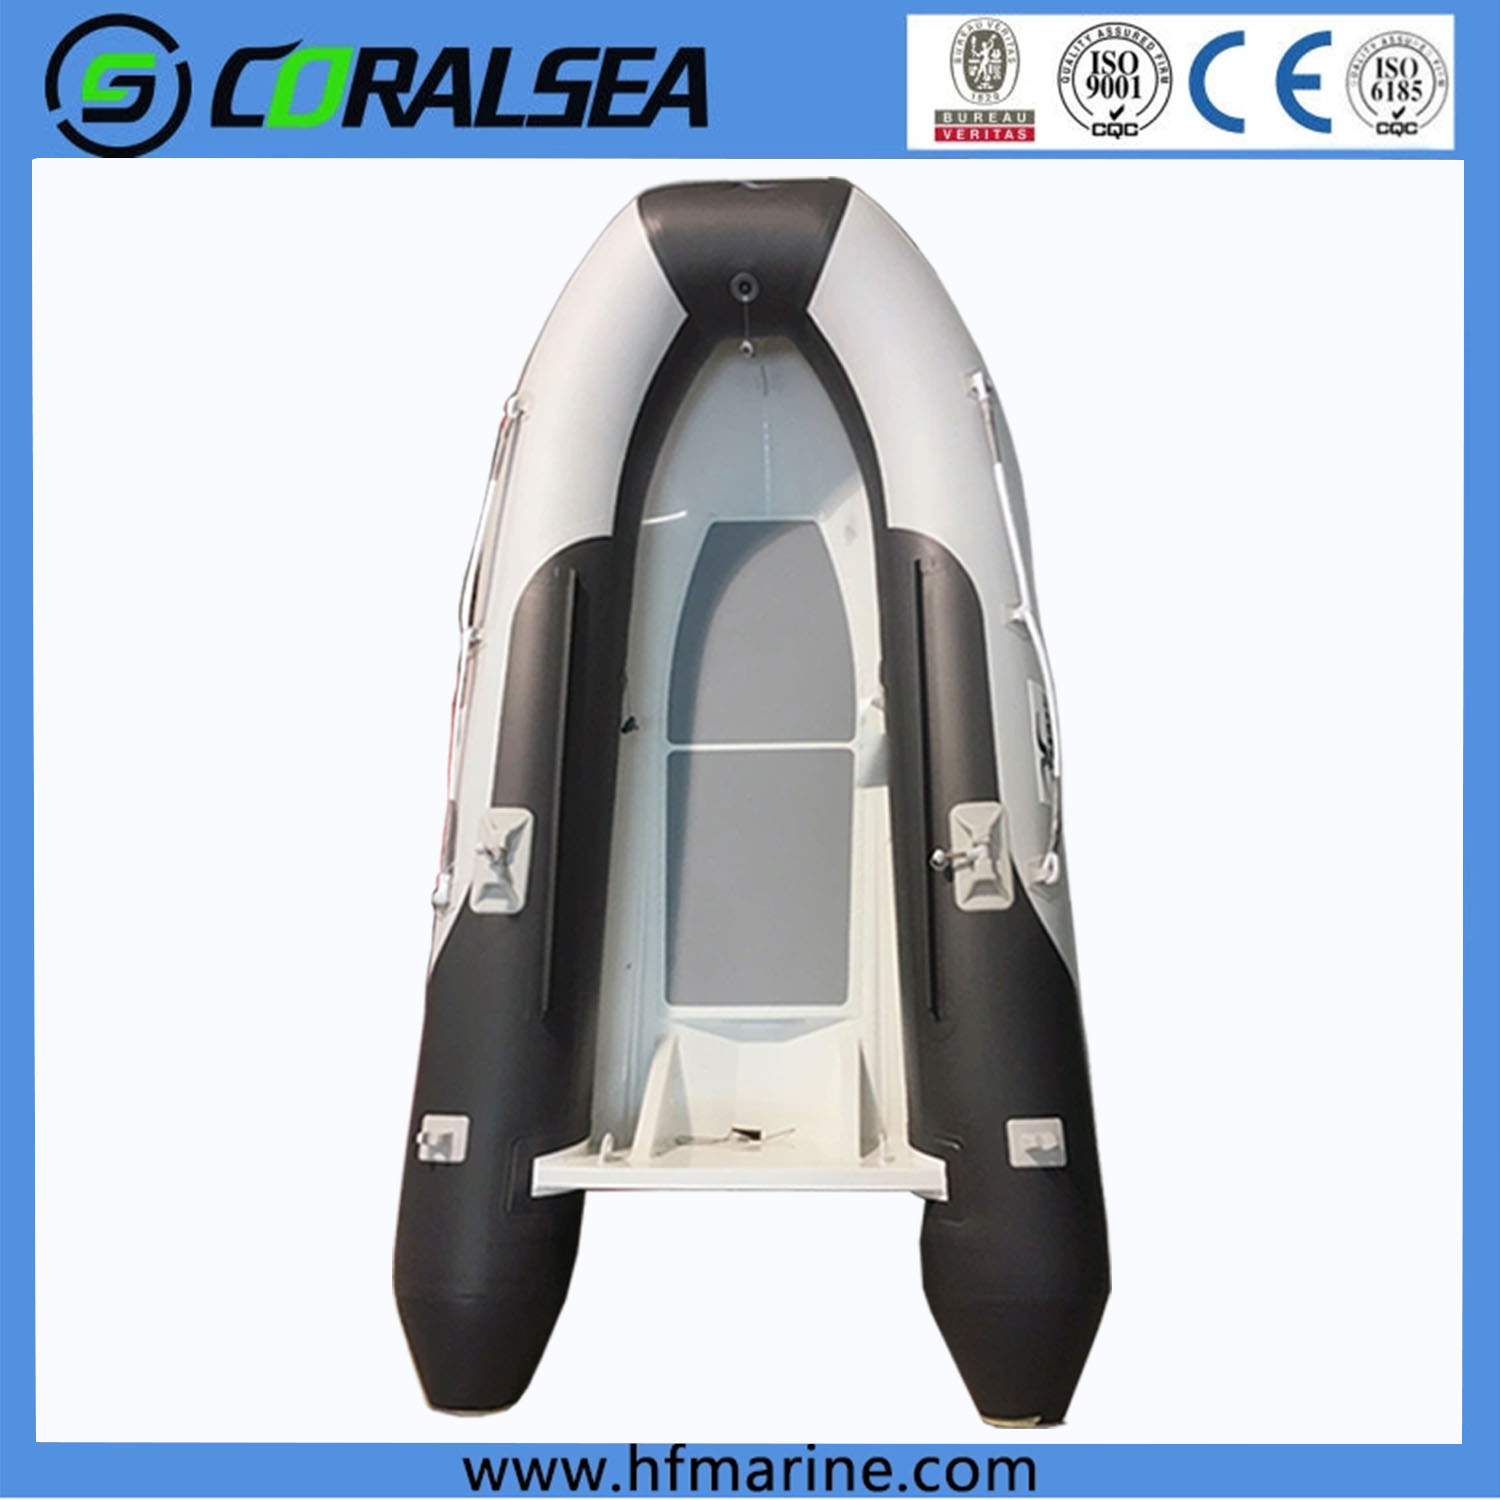 Wholesale Rib Fishing Boat Manufacturer – Double-layer deep-V